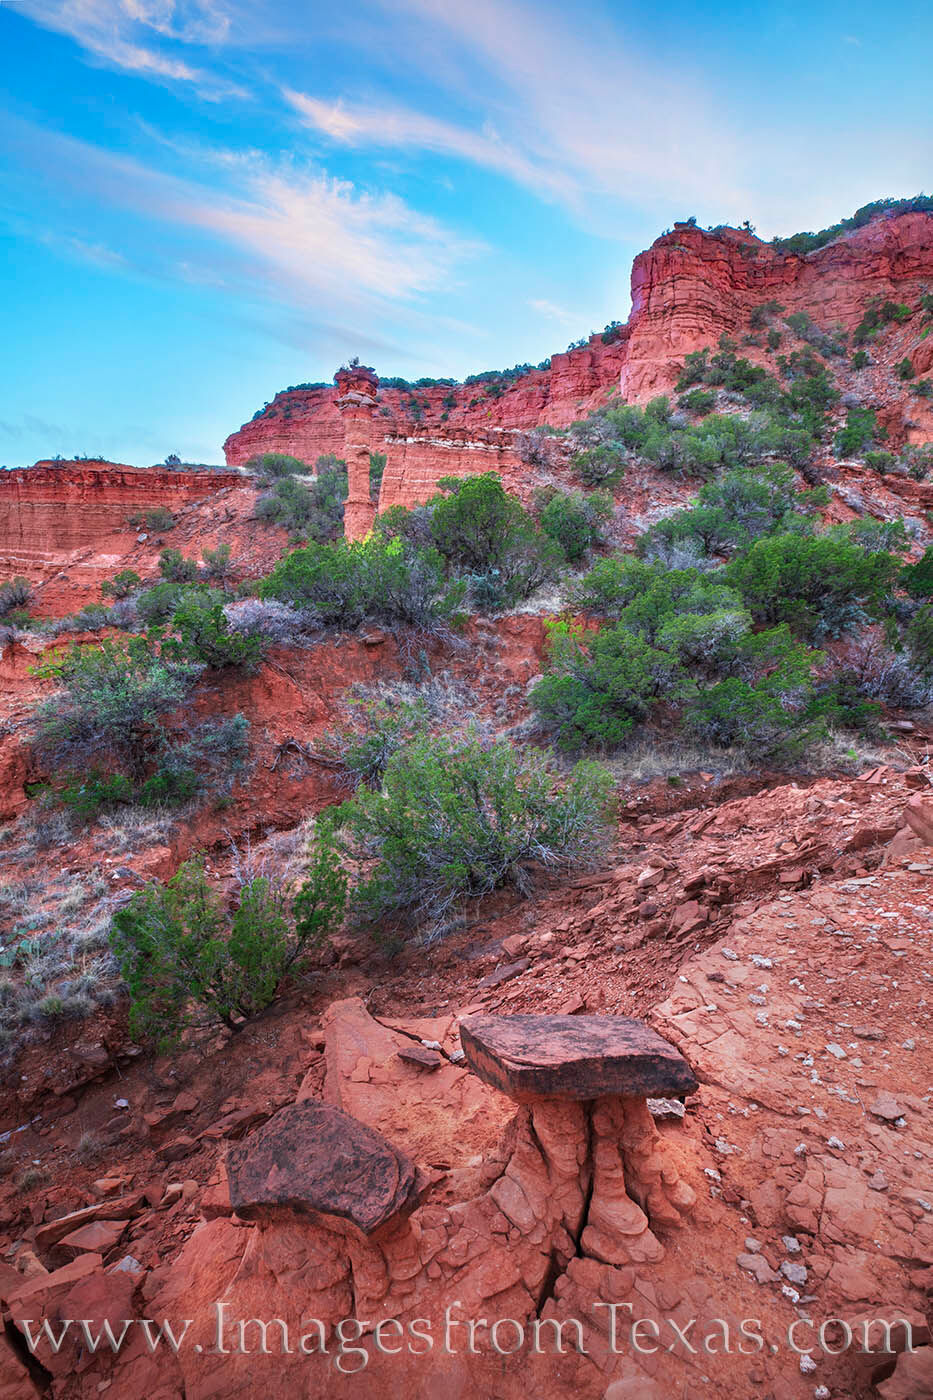 In the foreground, a small hoodoo sits unchanged, just as it has for a thousand years. Deep in the hidden valleys of Caprock...